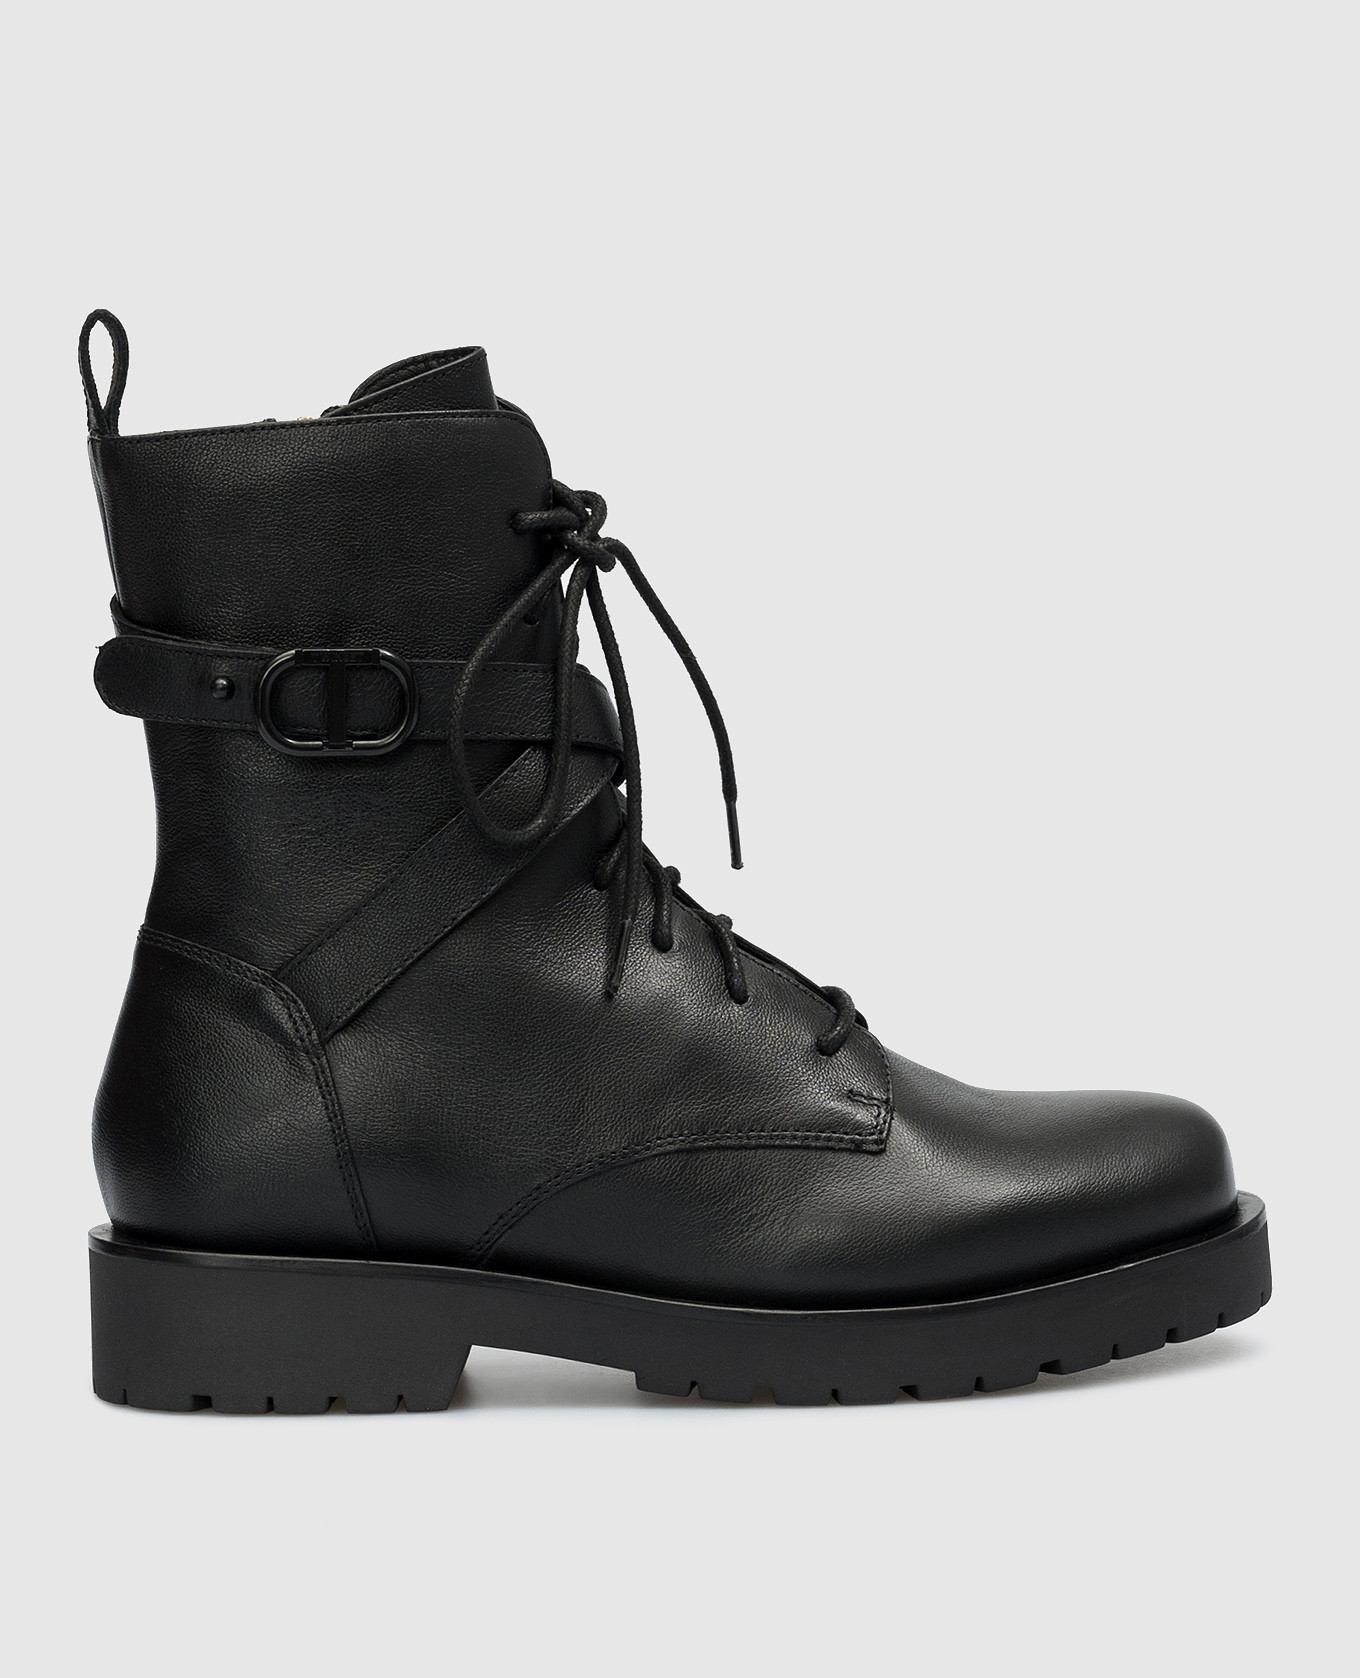 Black leather boots with logo